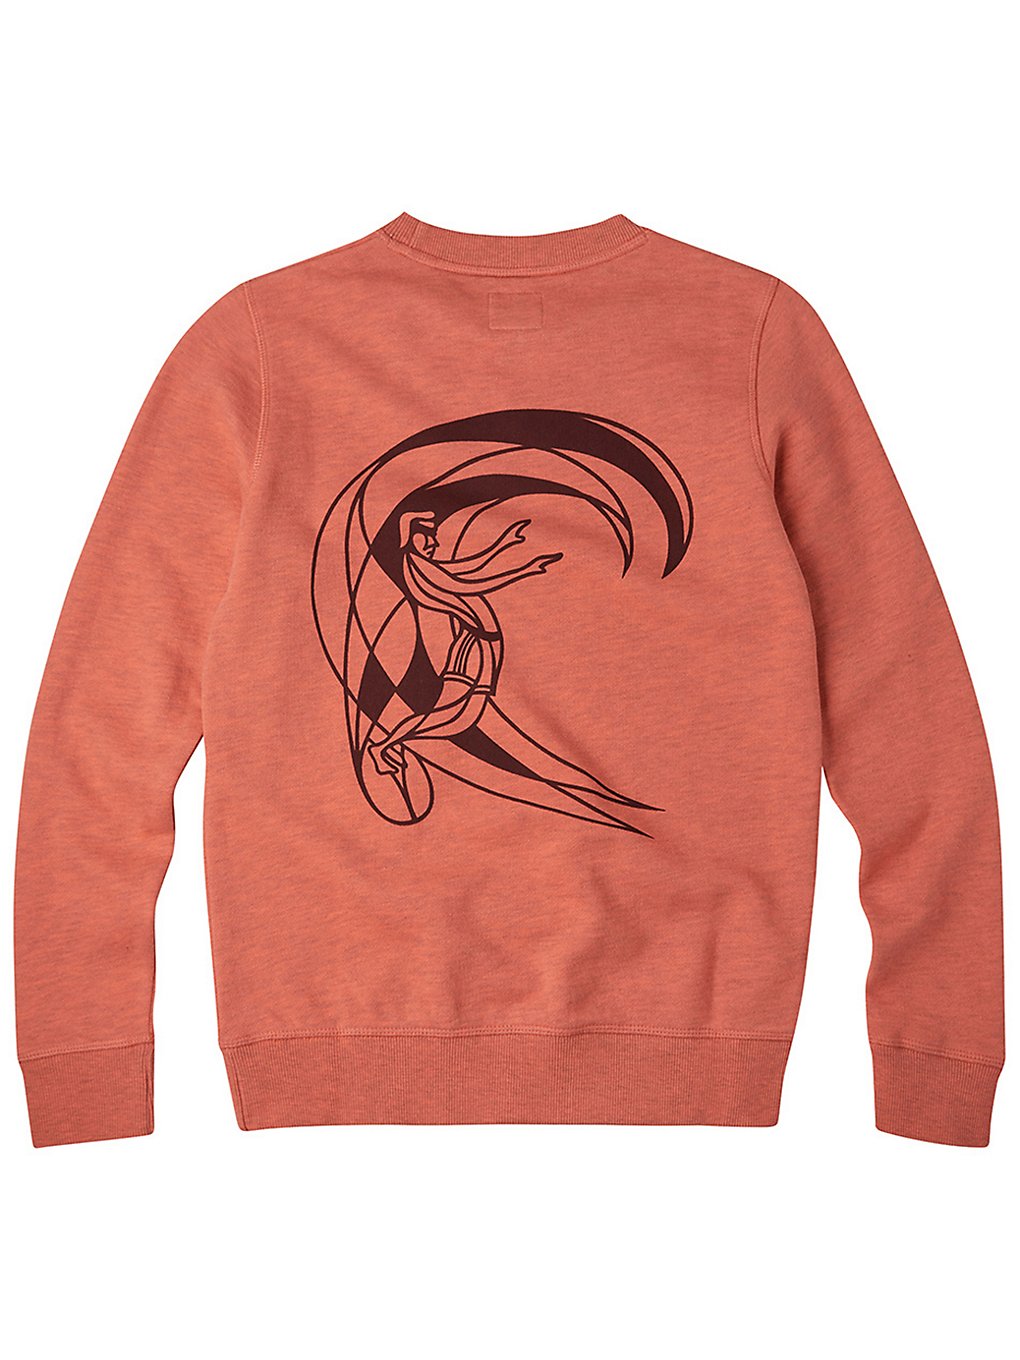 O'Neill Circle Surfer Crew Sweater living coral kaufen